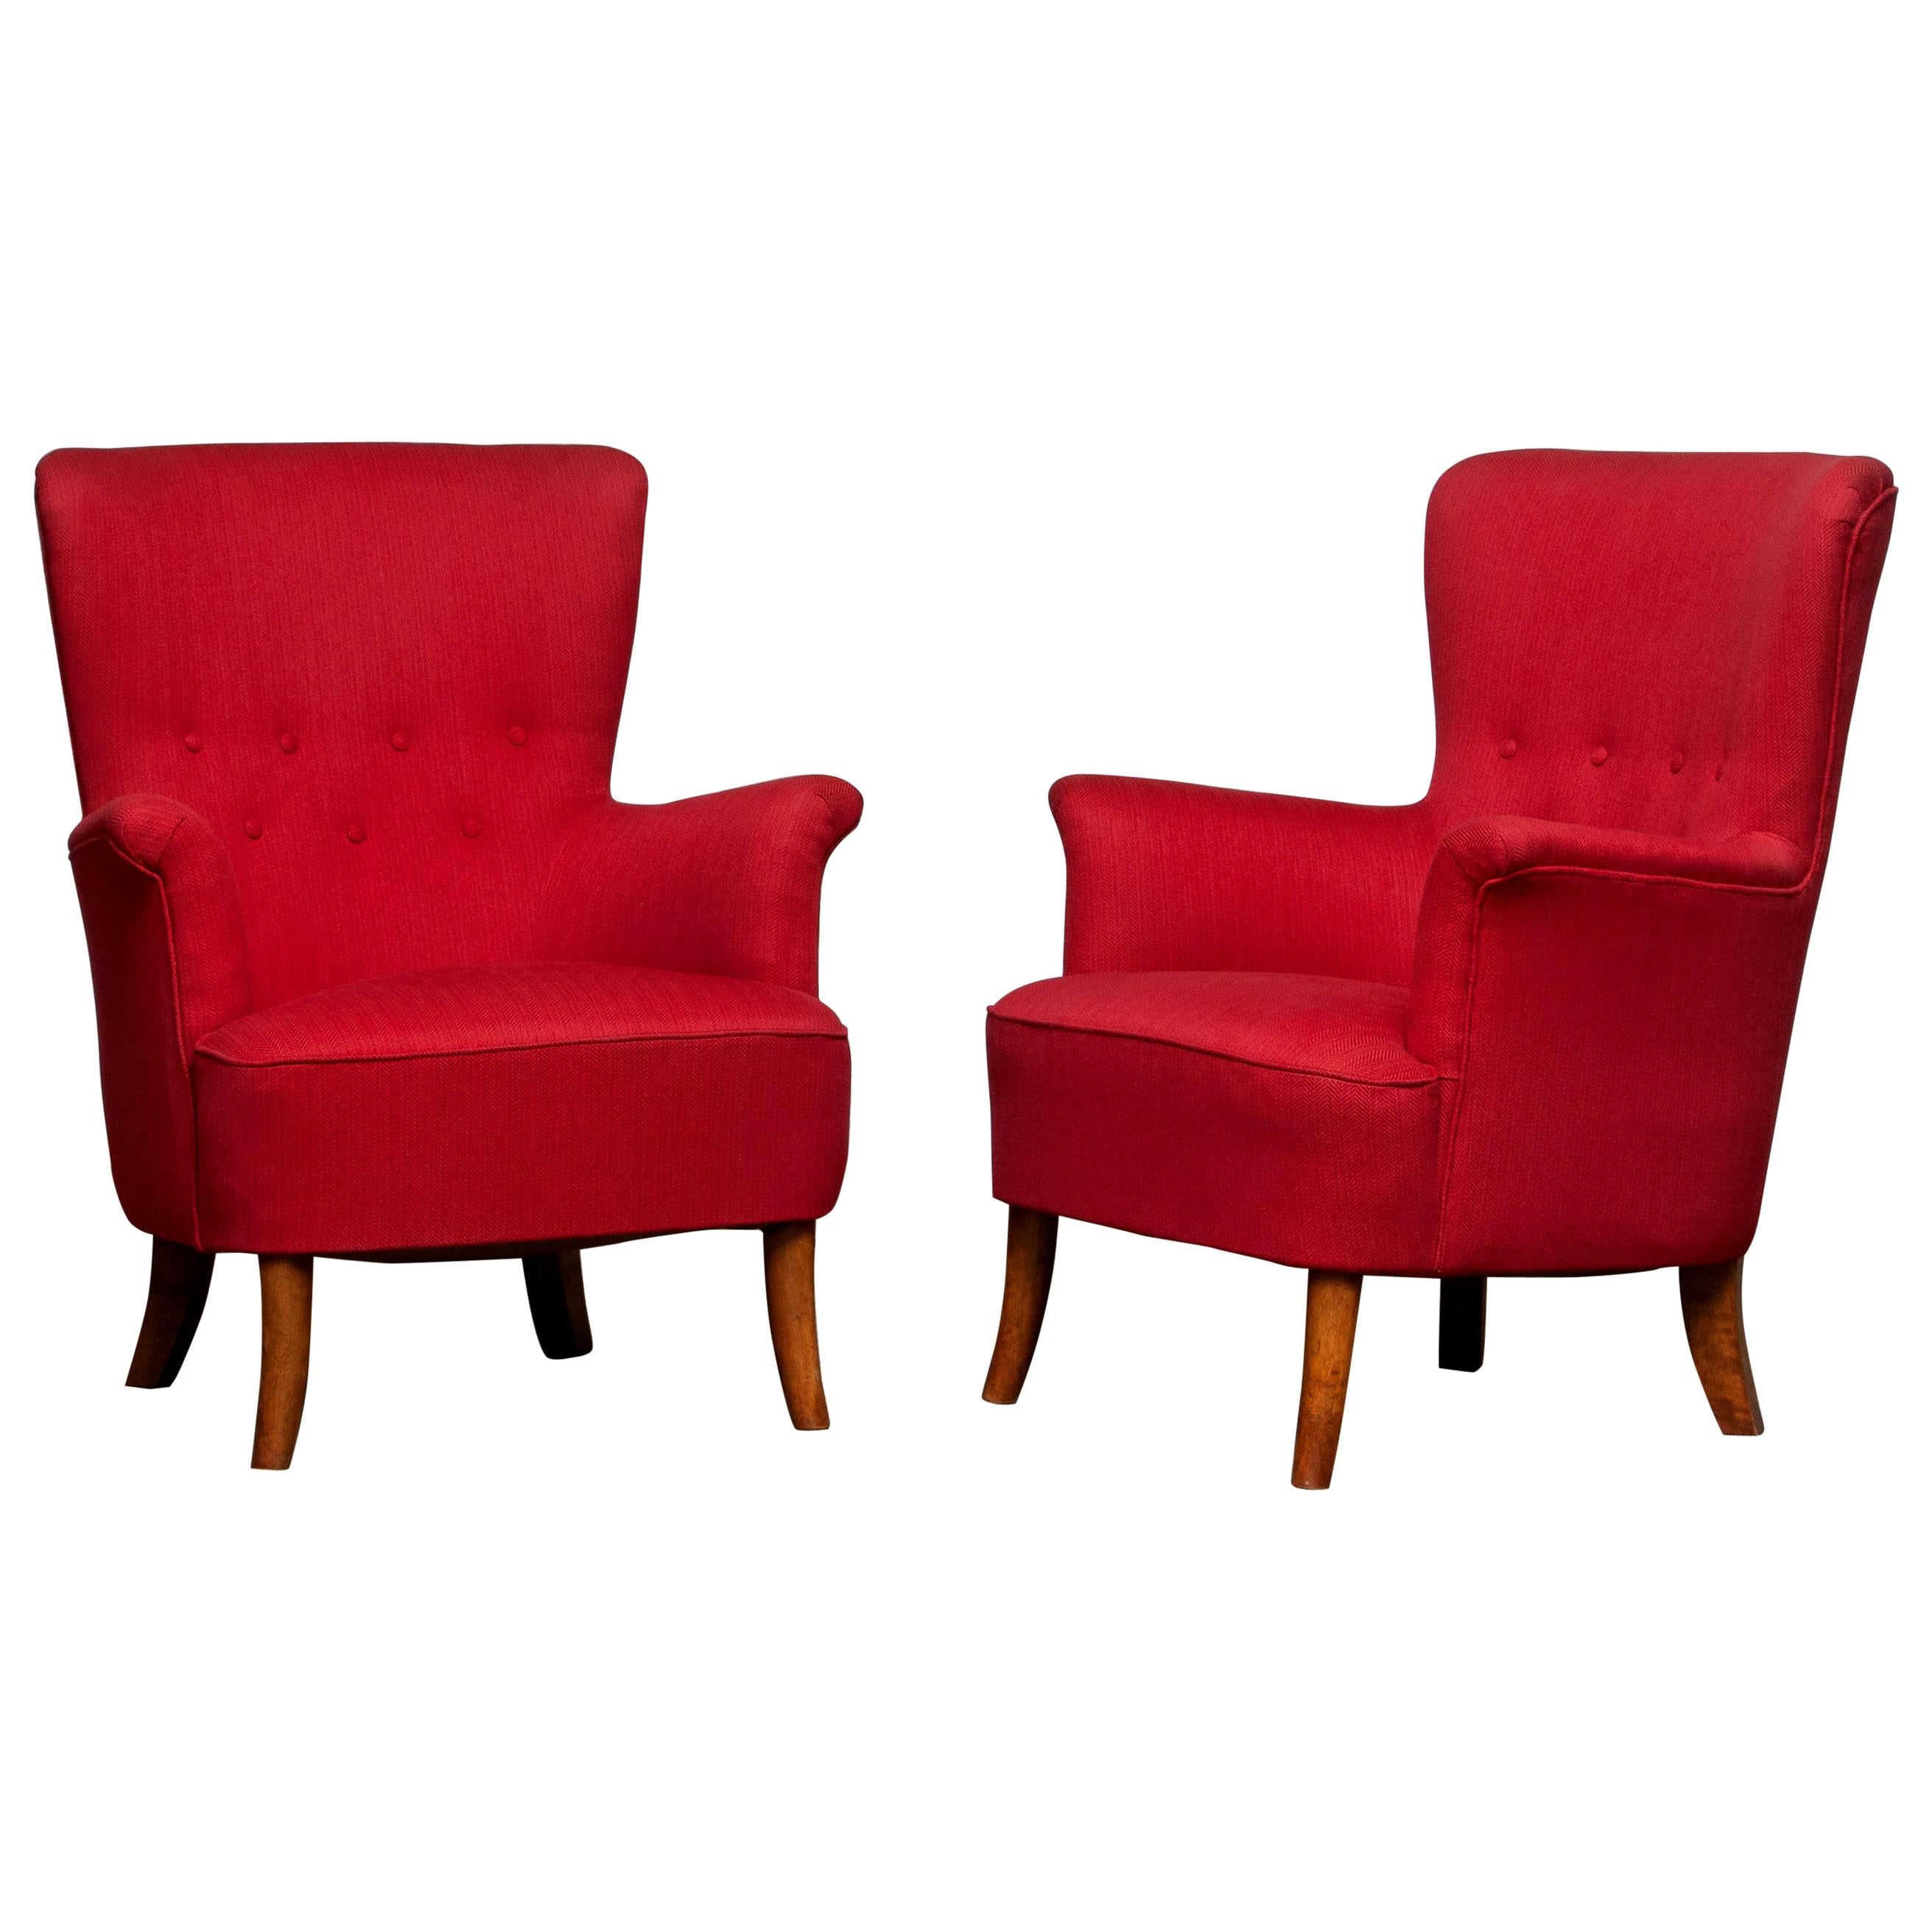 Beautiful set of two fuchsia / red easy / lounge chairs designed by Carl Malmsten for OH Sjögren, Sweden. The overall condition is good and clean. Period: 1940-1949.